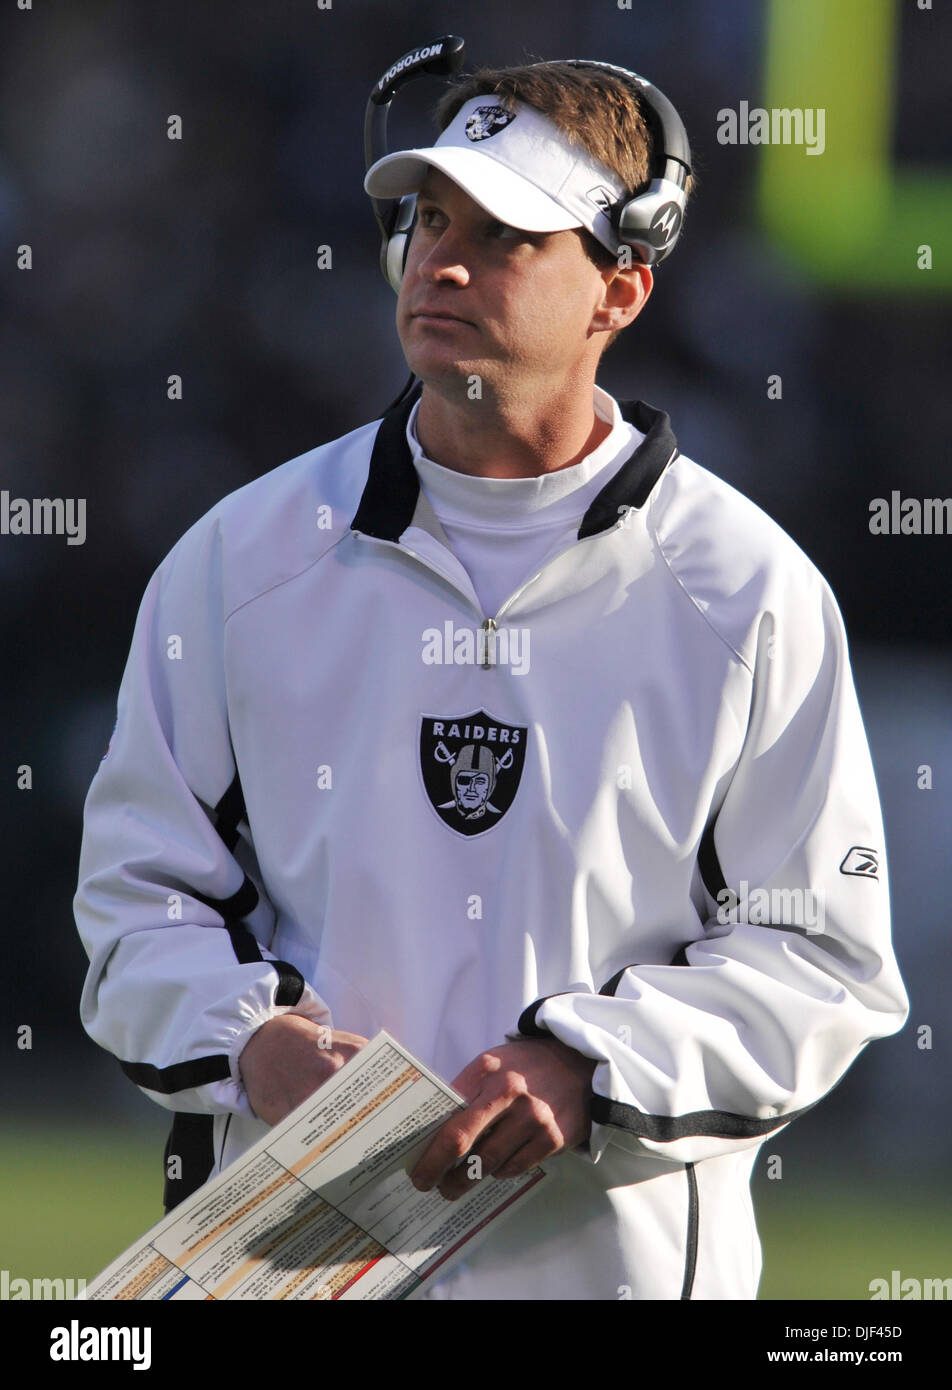 Oakland Raiders' head coach Lane Kiffin glances at the scoreboard while playing the San Diego Chargers in the 2nd quarter of their game on Sunday, December 29, 2007 at McAfee Coliseum in Oakland, Calif. (Jose Carlos Fajardo/Contra Costa Times/ZUMA Press). Stock Photo